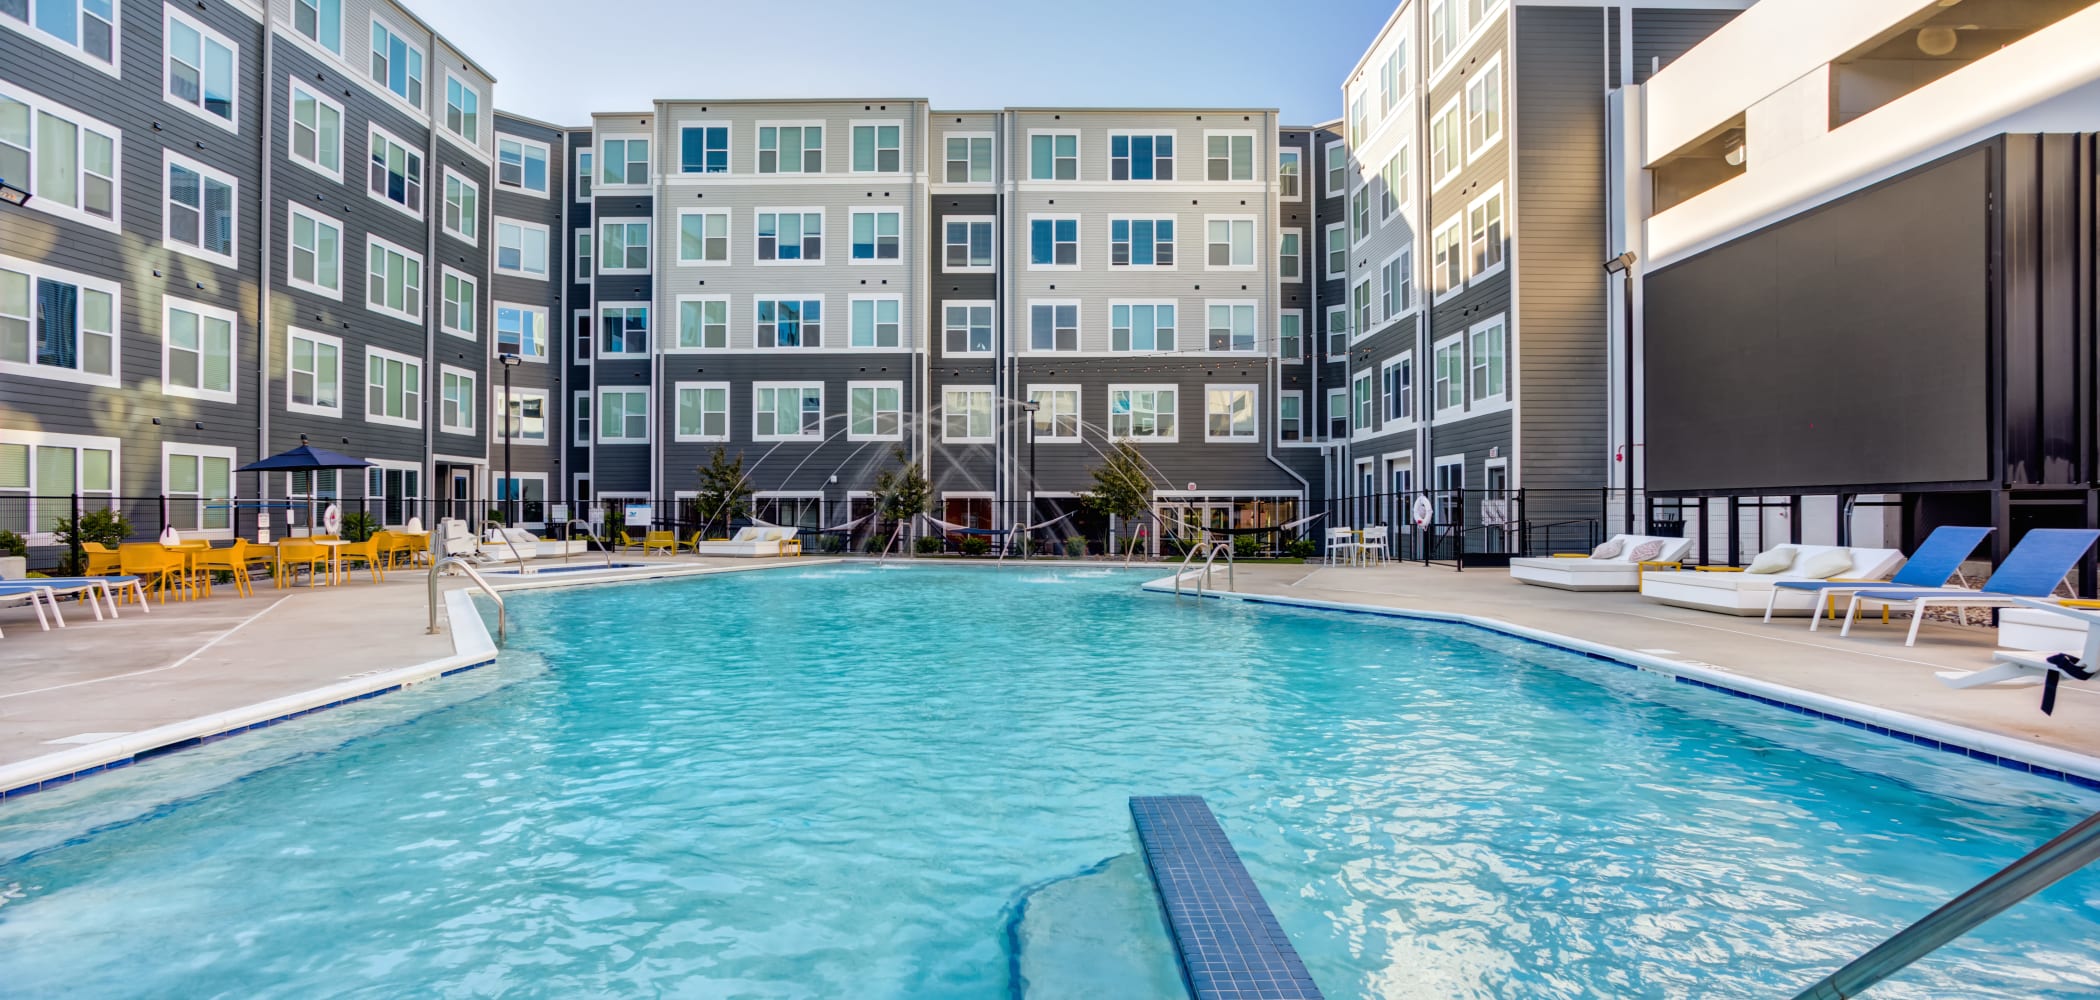 Our Apartments in Coralville, Iowa offer a Swimming Pool